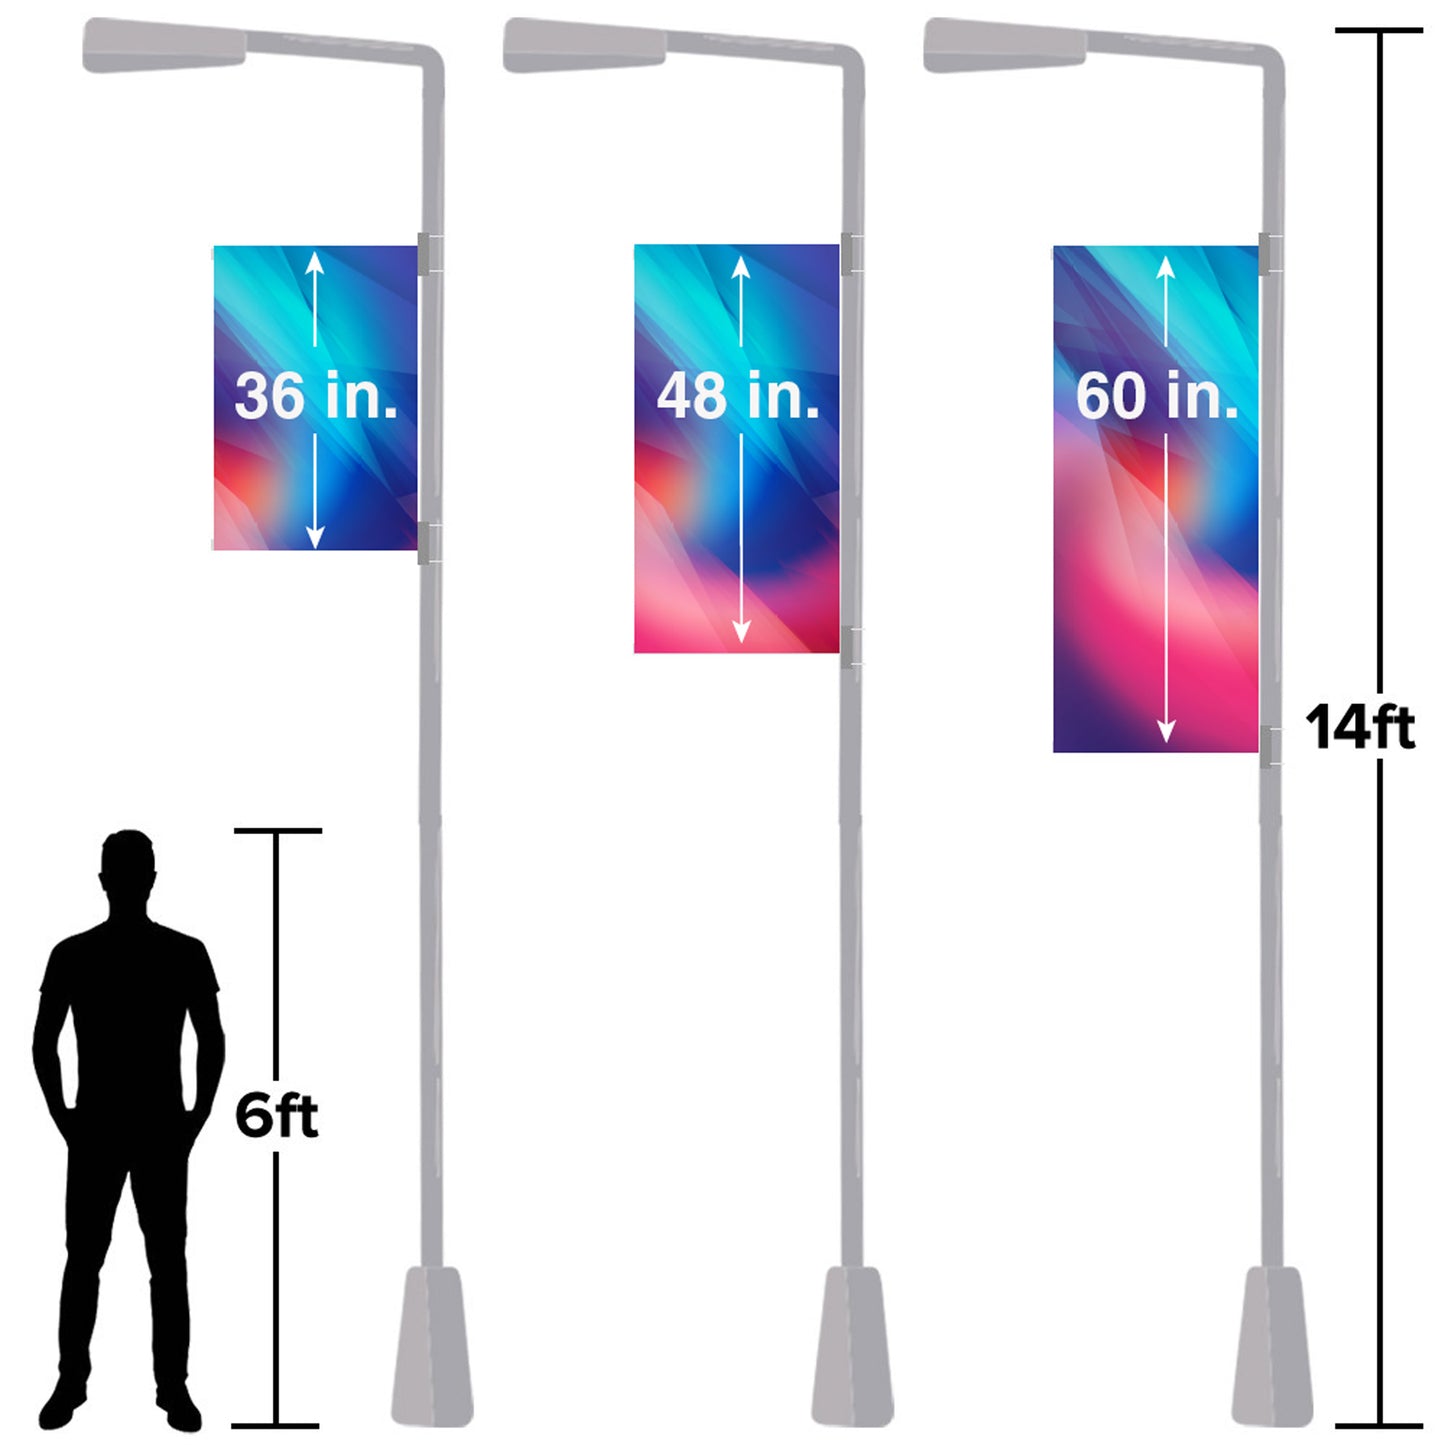 Graphic showing different heights of banners in comparison to the average man